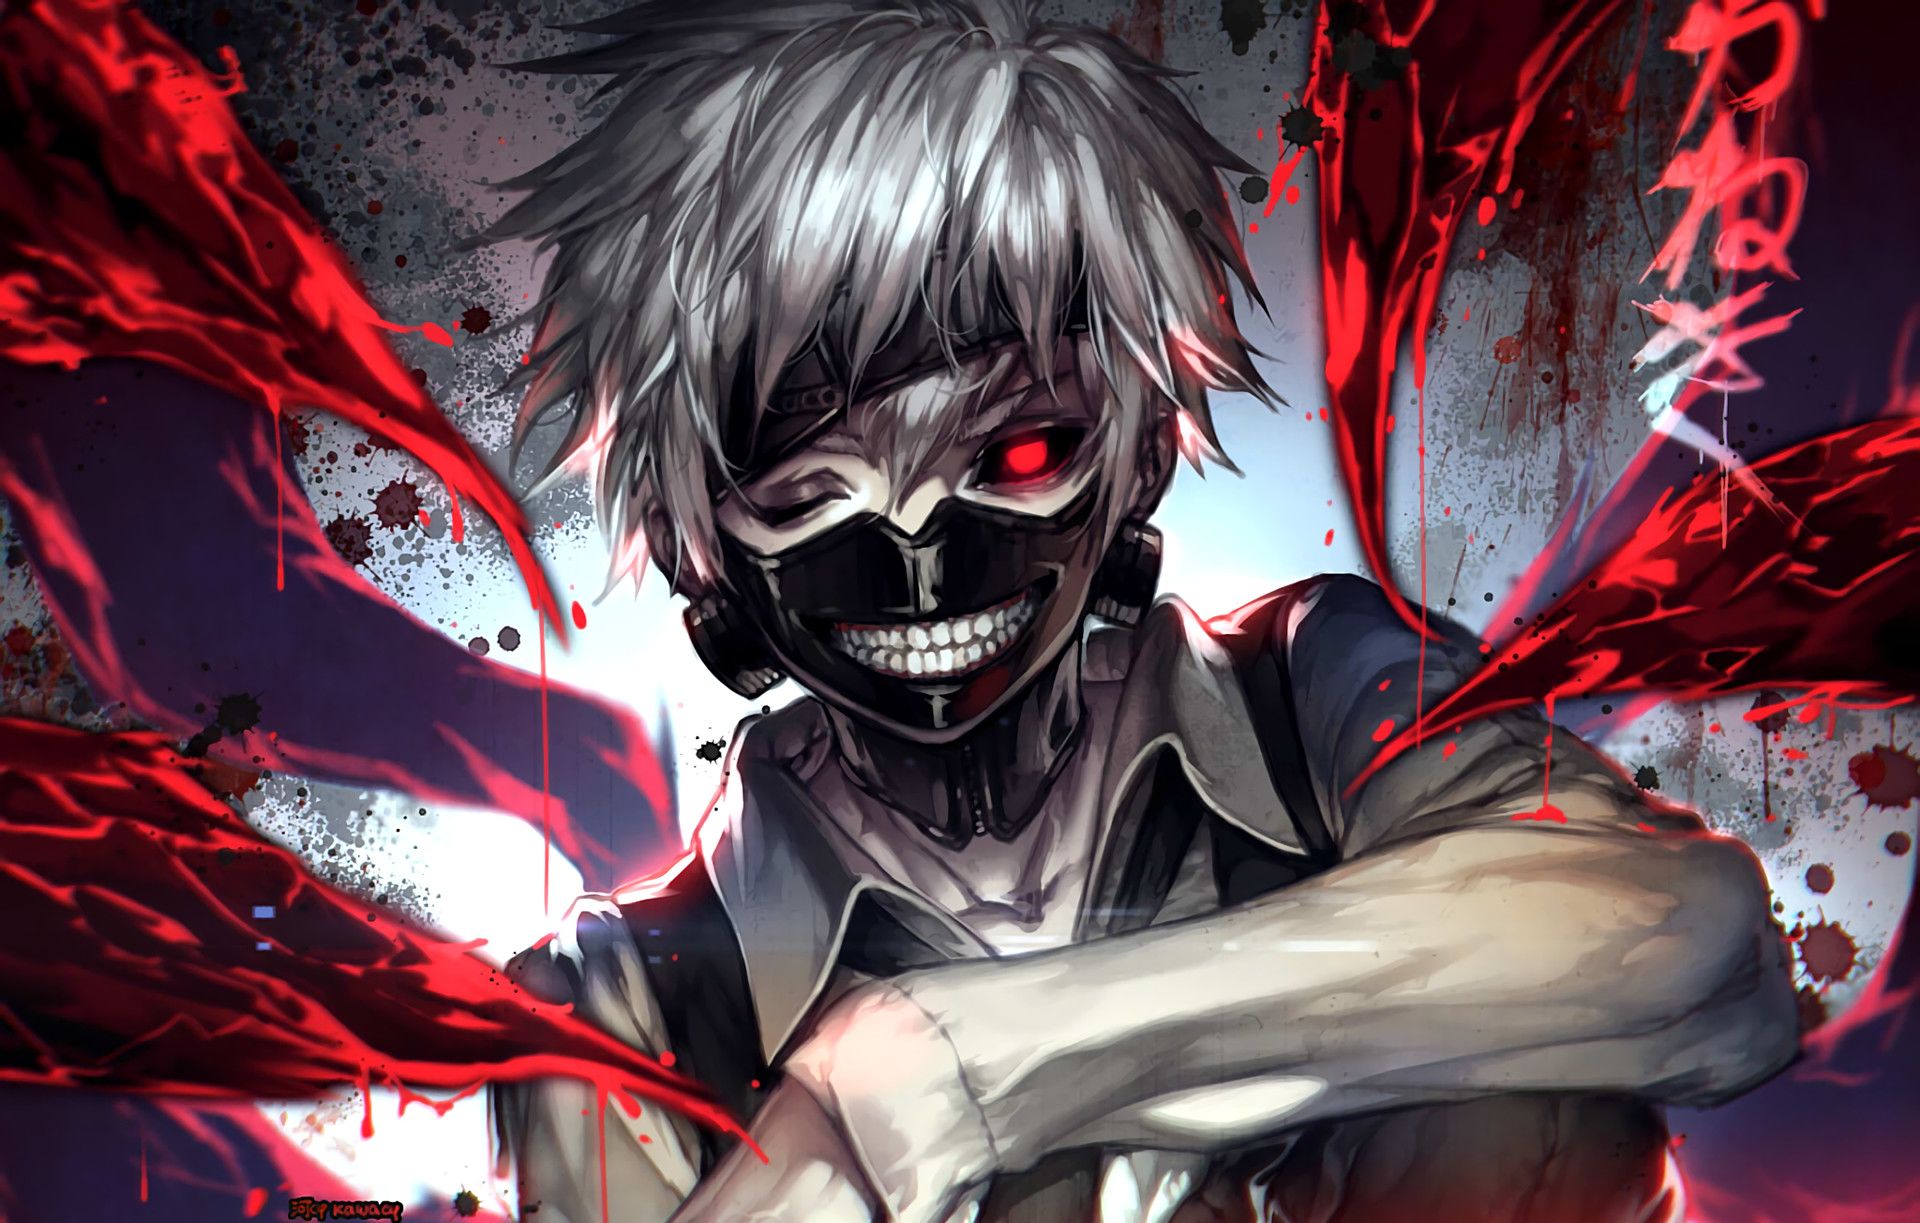 Bloody Anime wallpaper wallpaper Collections